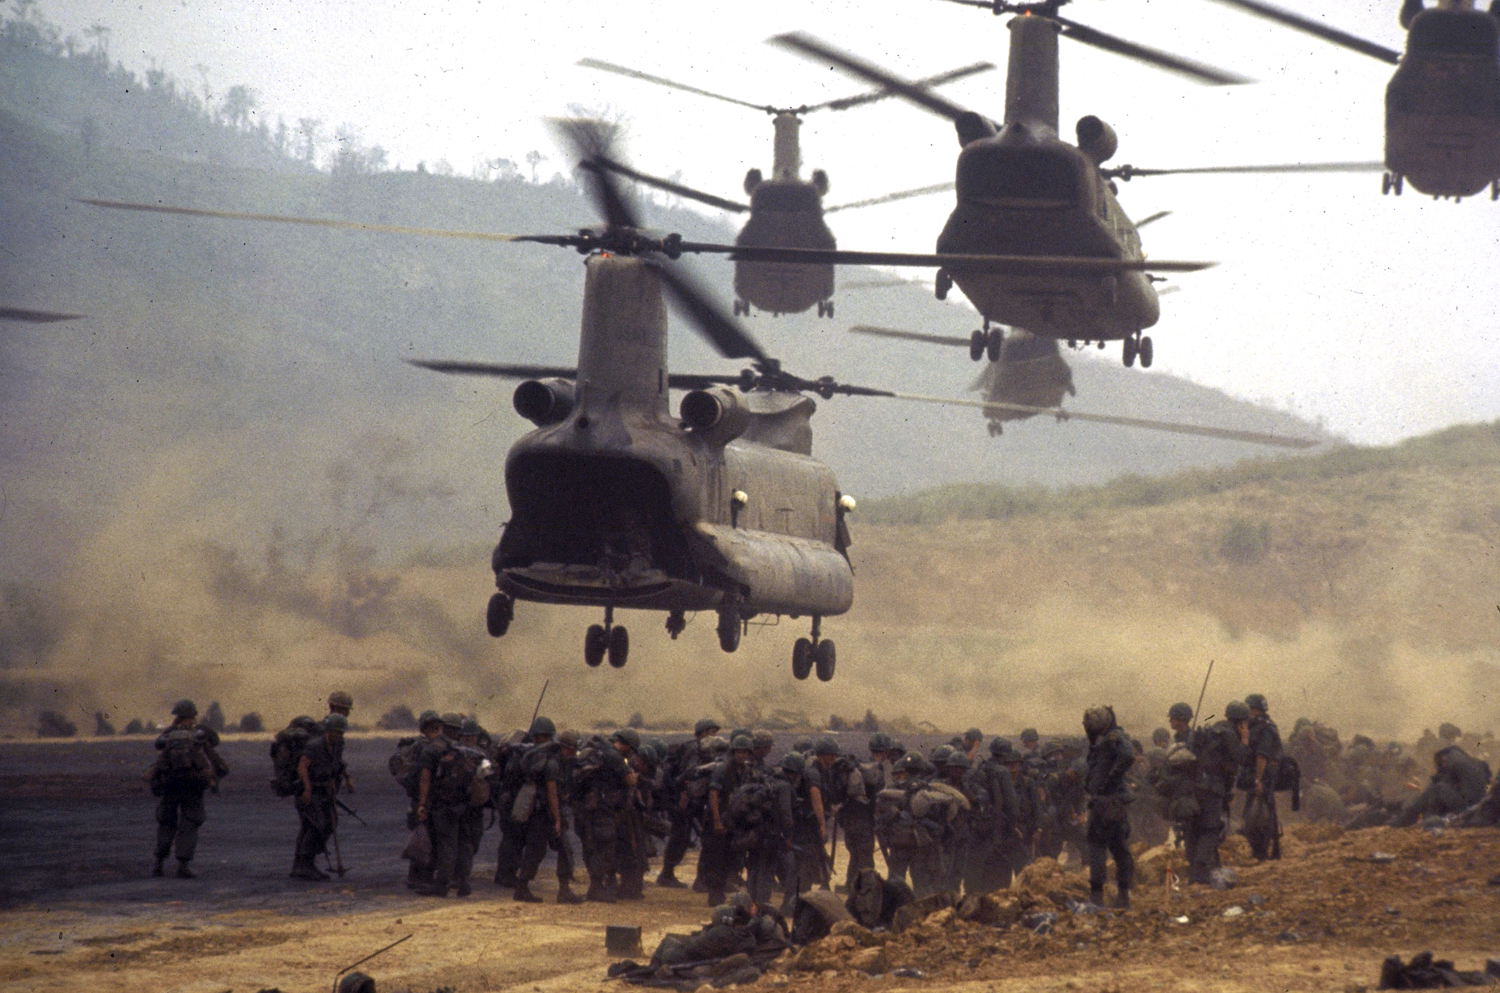 Chinook helicopters taking off after deploying ground troops along area known as "Route 9" for an offensive patrol, Operation Pegasus, Vietnam, 1968.